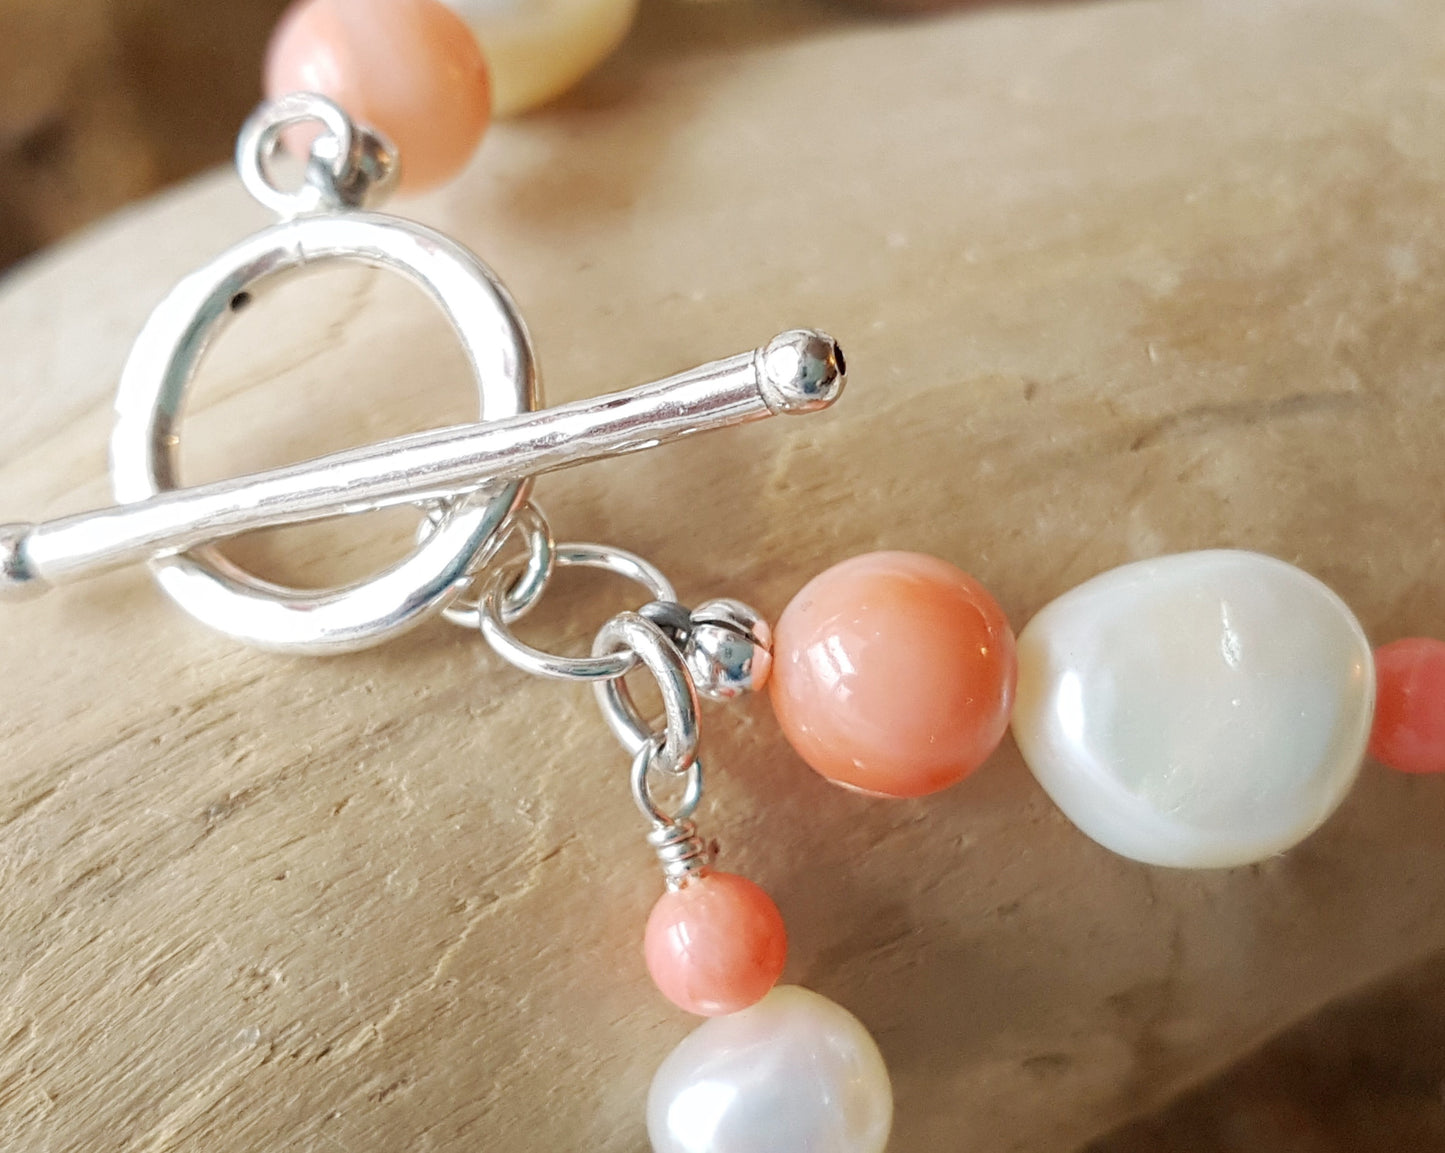 Angle Skin Coral, Mother of Pearl, Freshwater Cultured Pearl Beaded Bracelet. Pale orange Coral, white Mother of Pearl, white Pearls. Round Toggle clasp. Sterling Silver